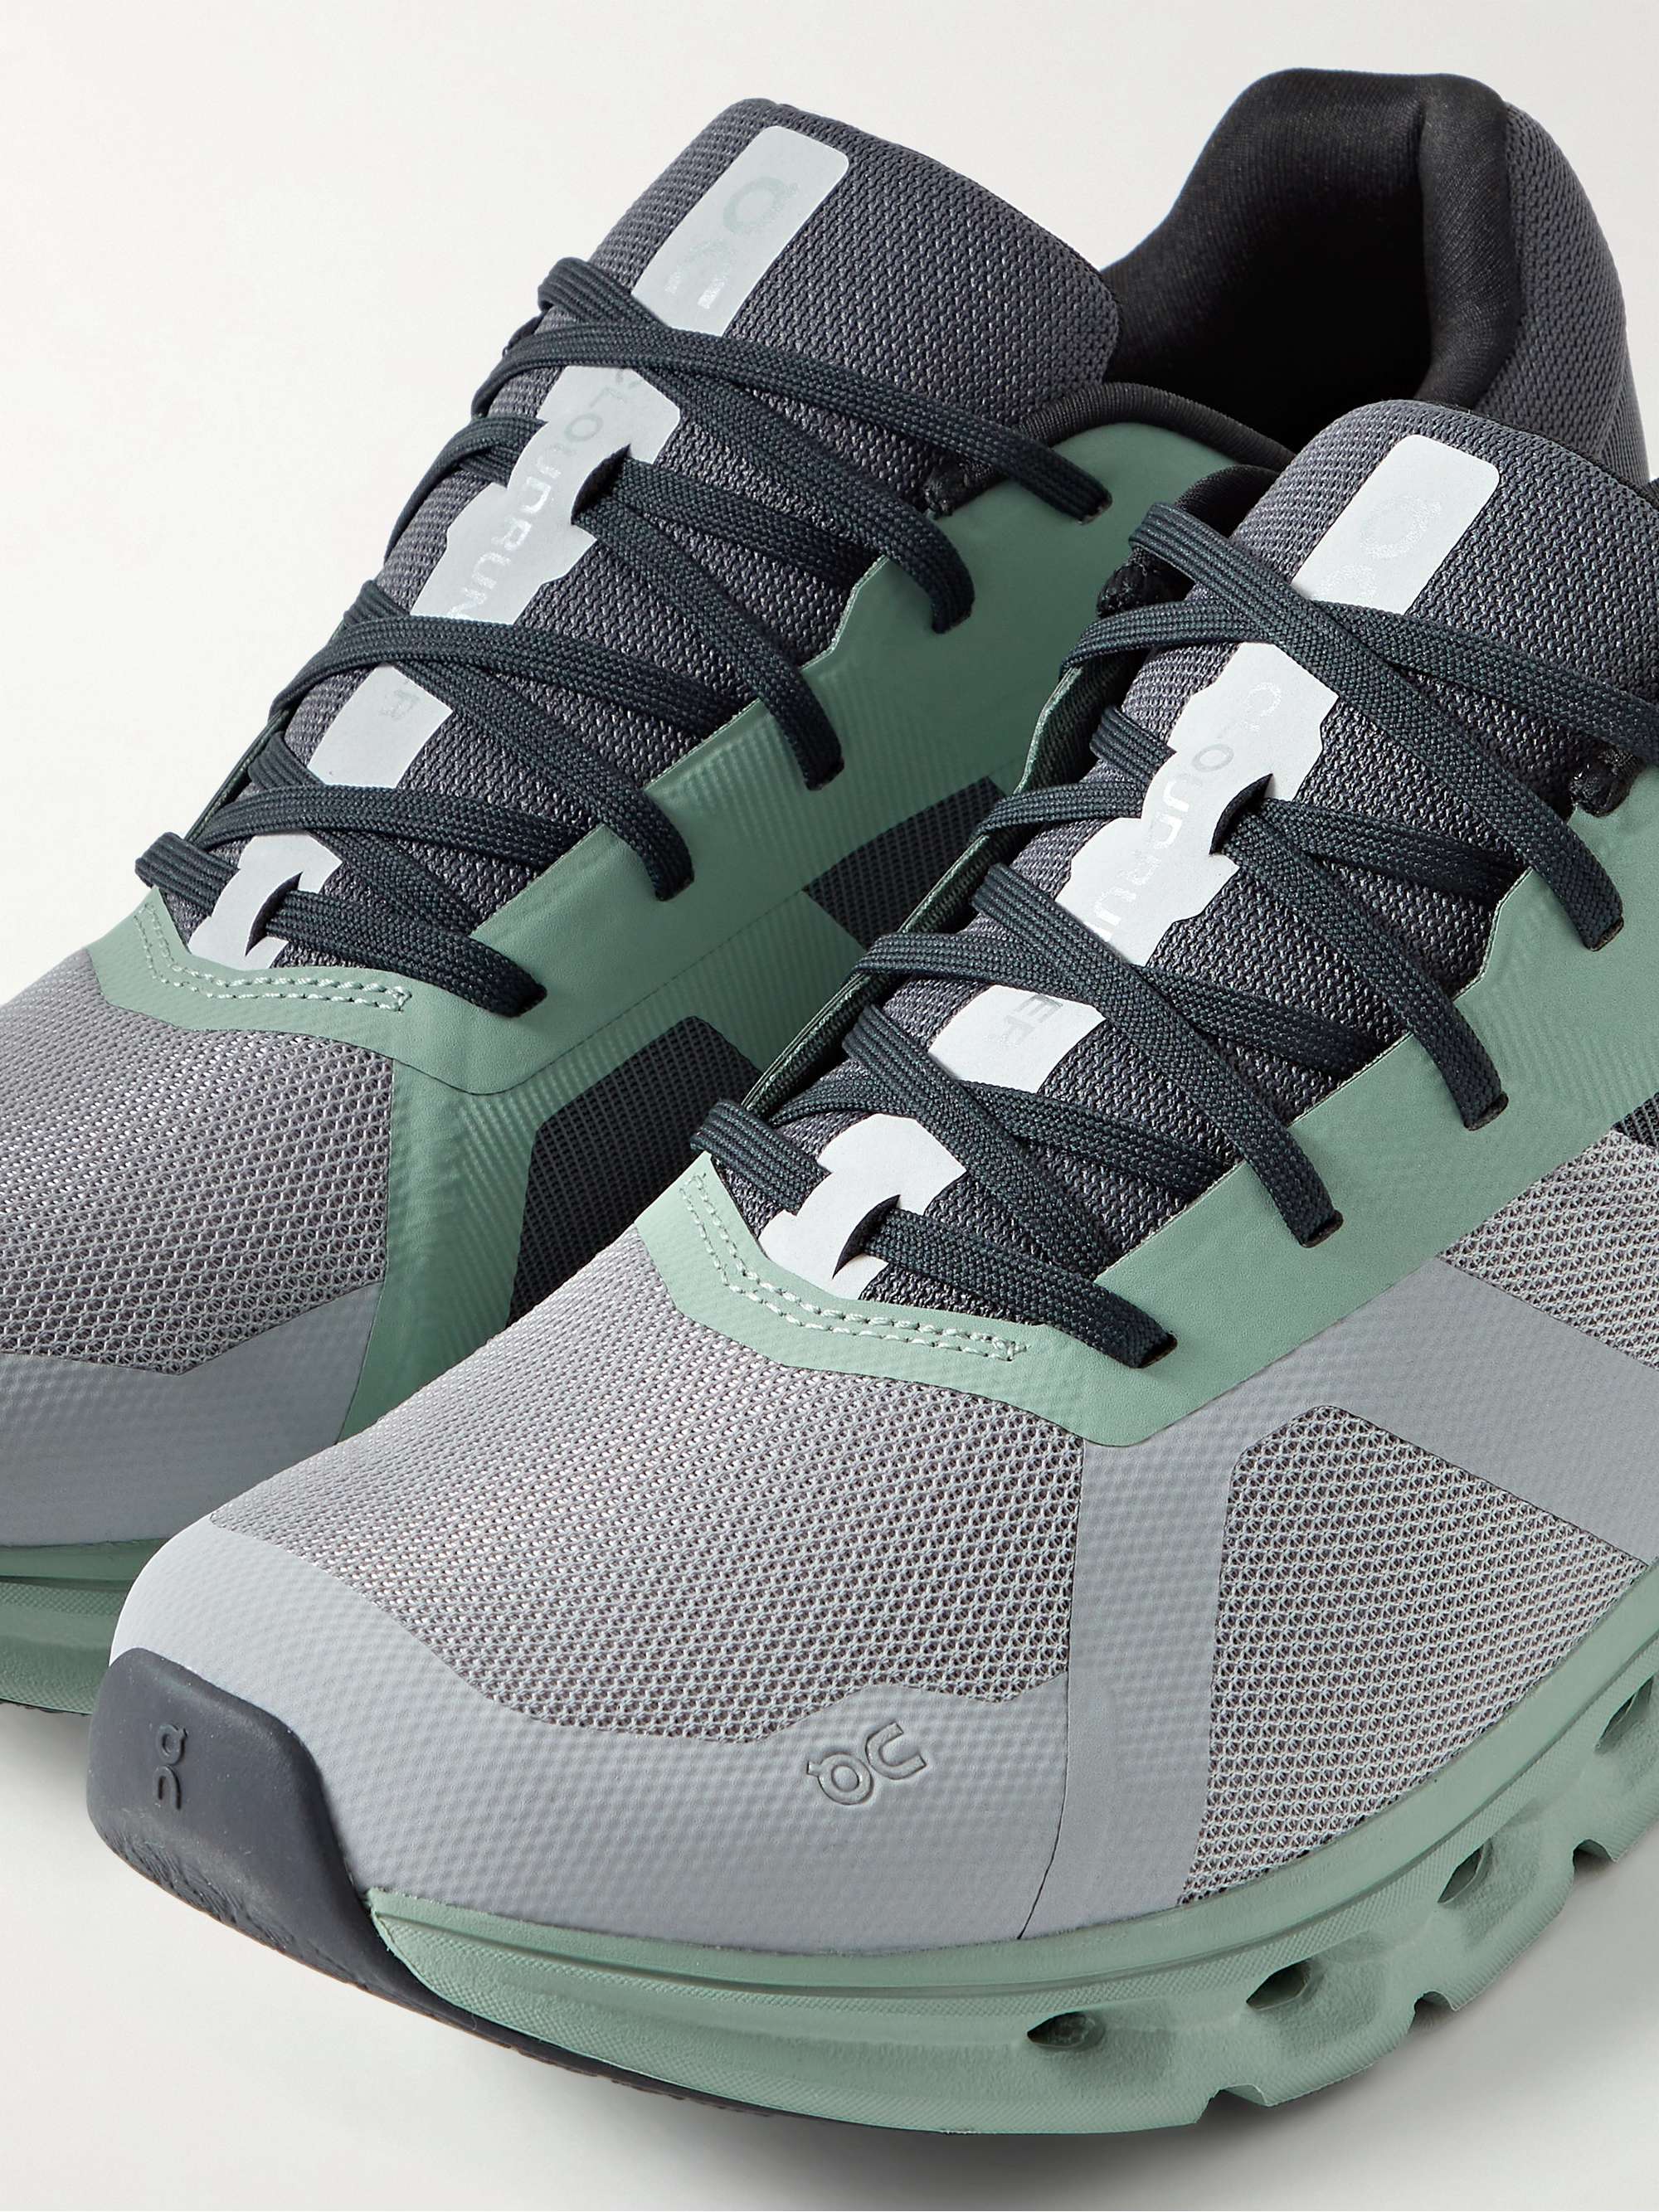 ON Cloudultra Rubber-Trimmed Mesh Trail Running Sneakers